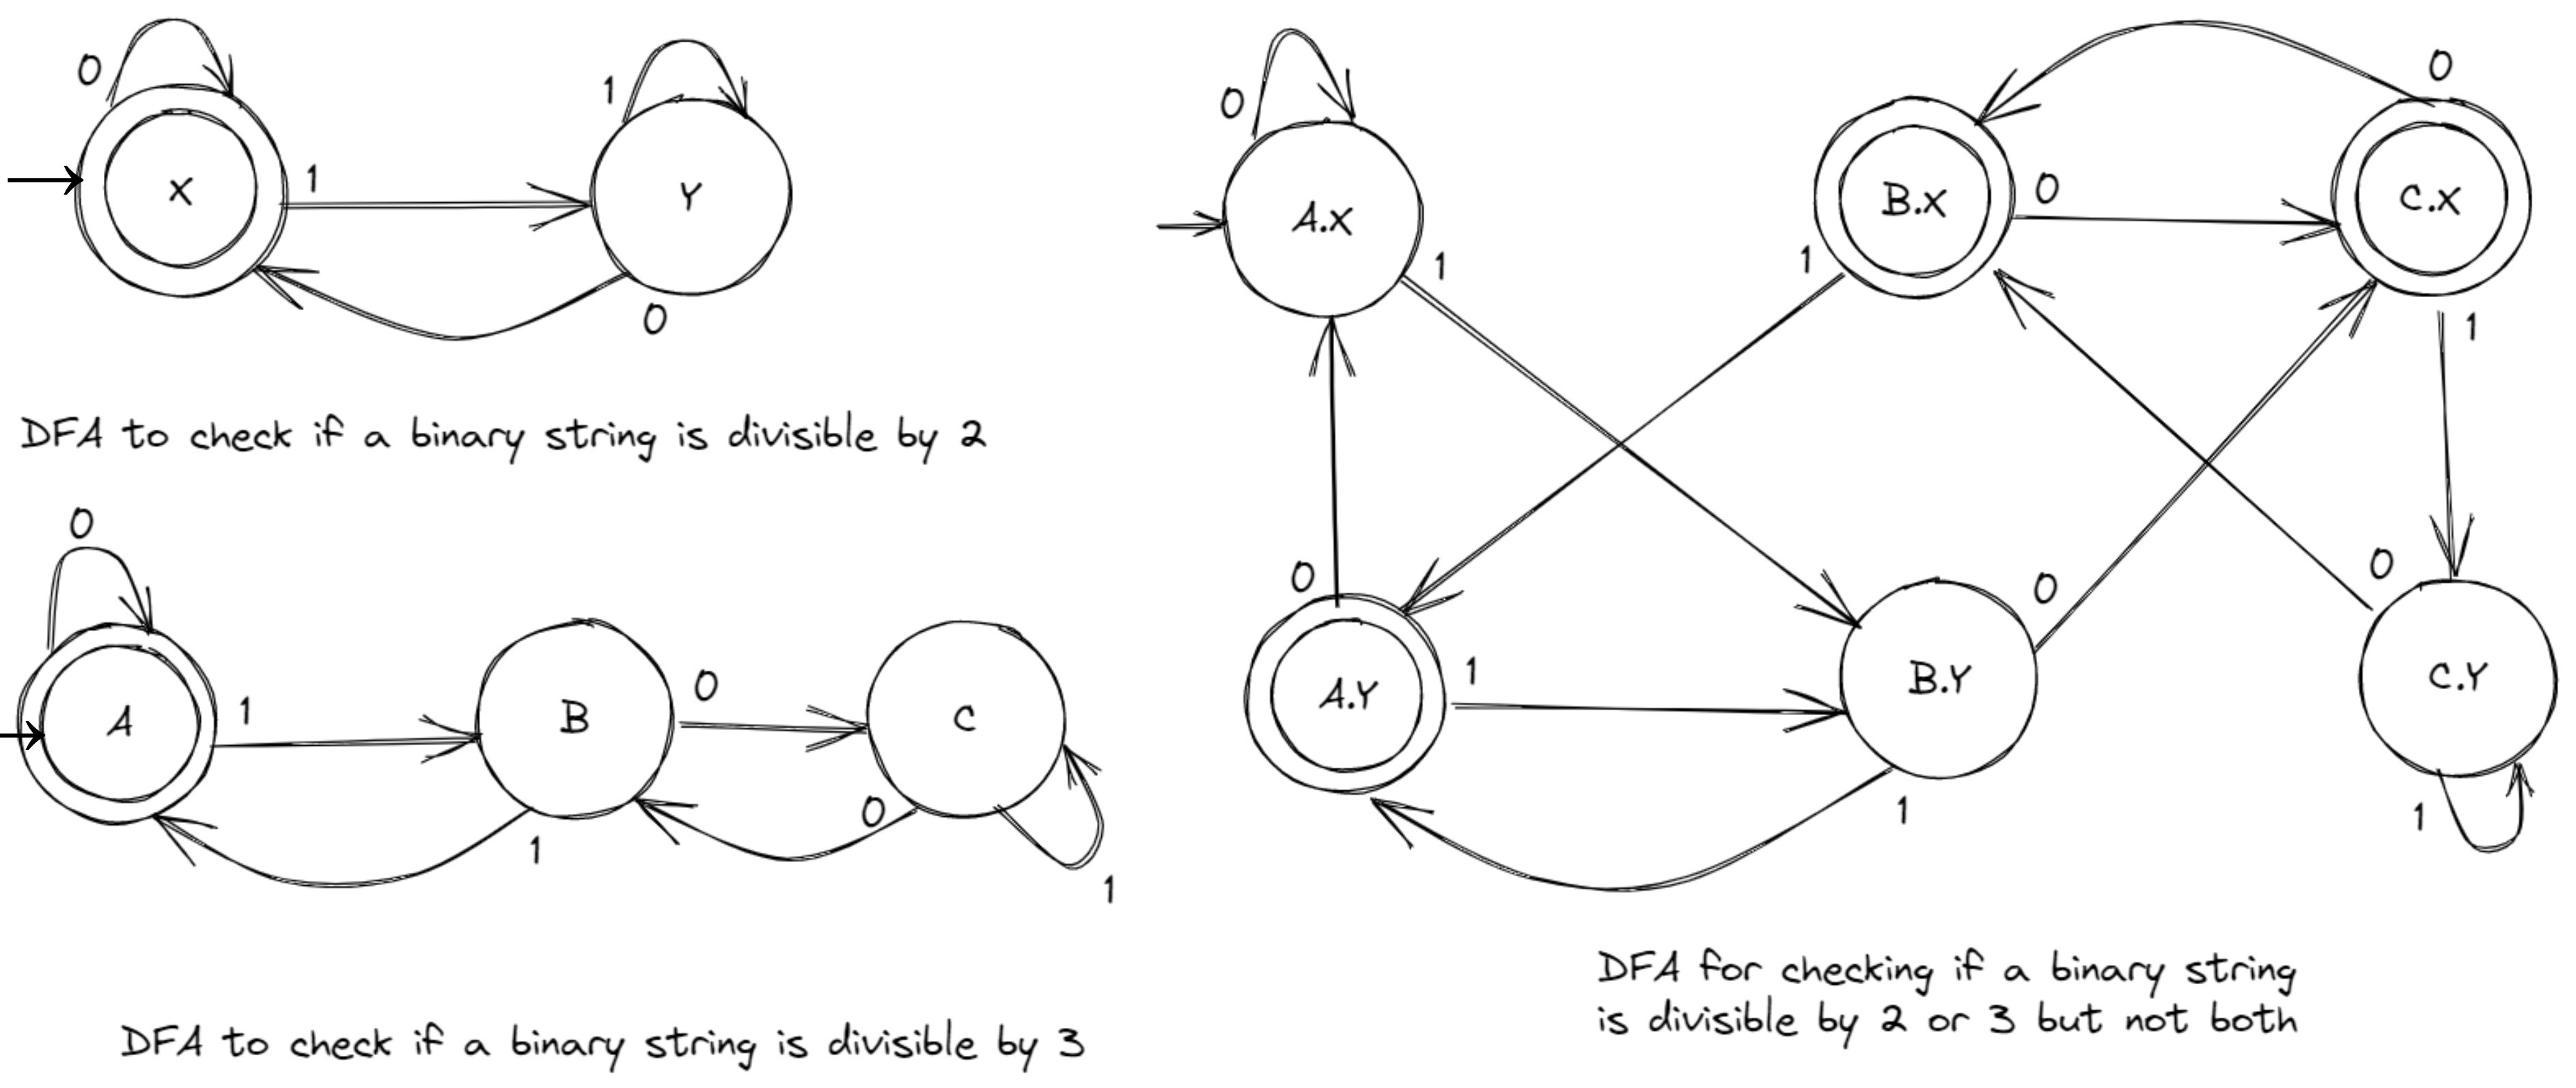 A dfa that checks if a binary string is divisible by 2 or 3 but not both